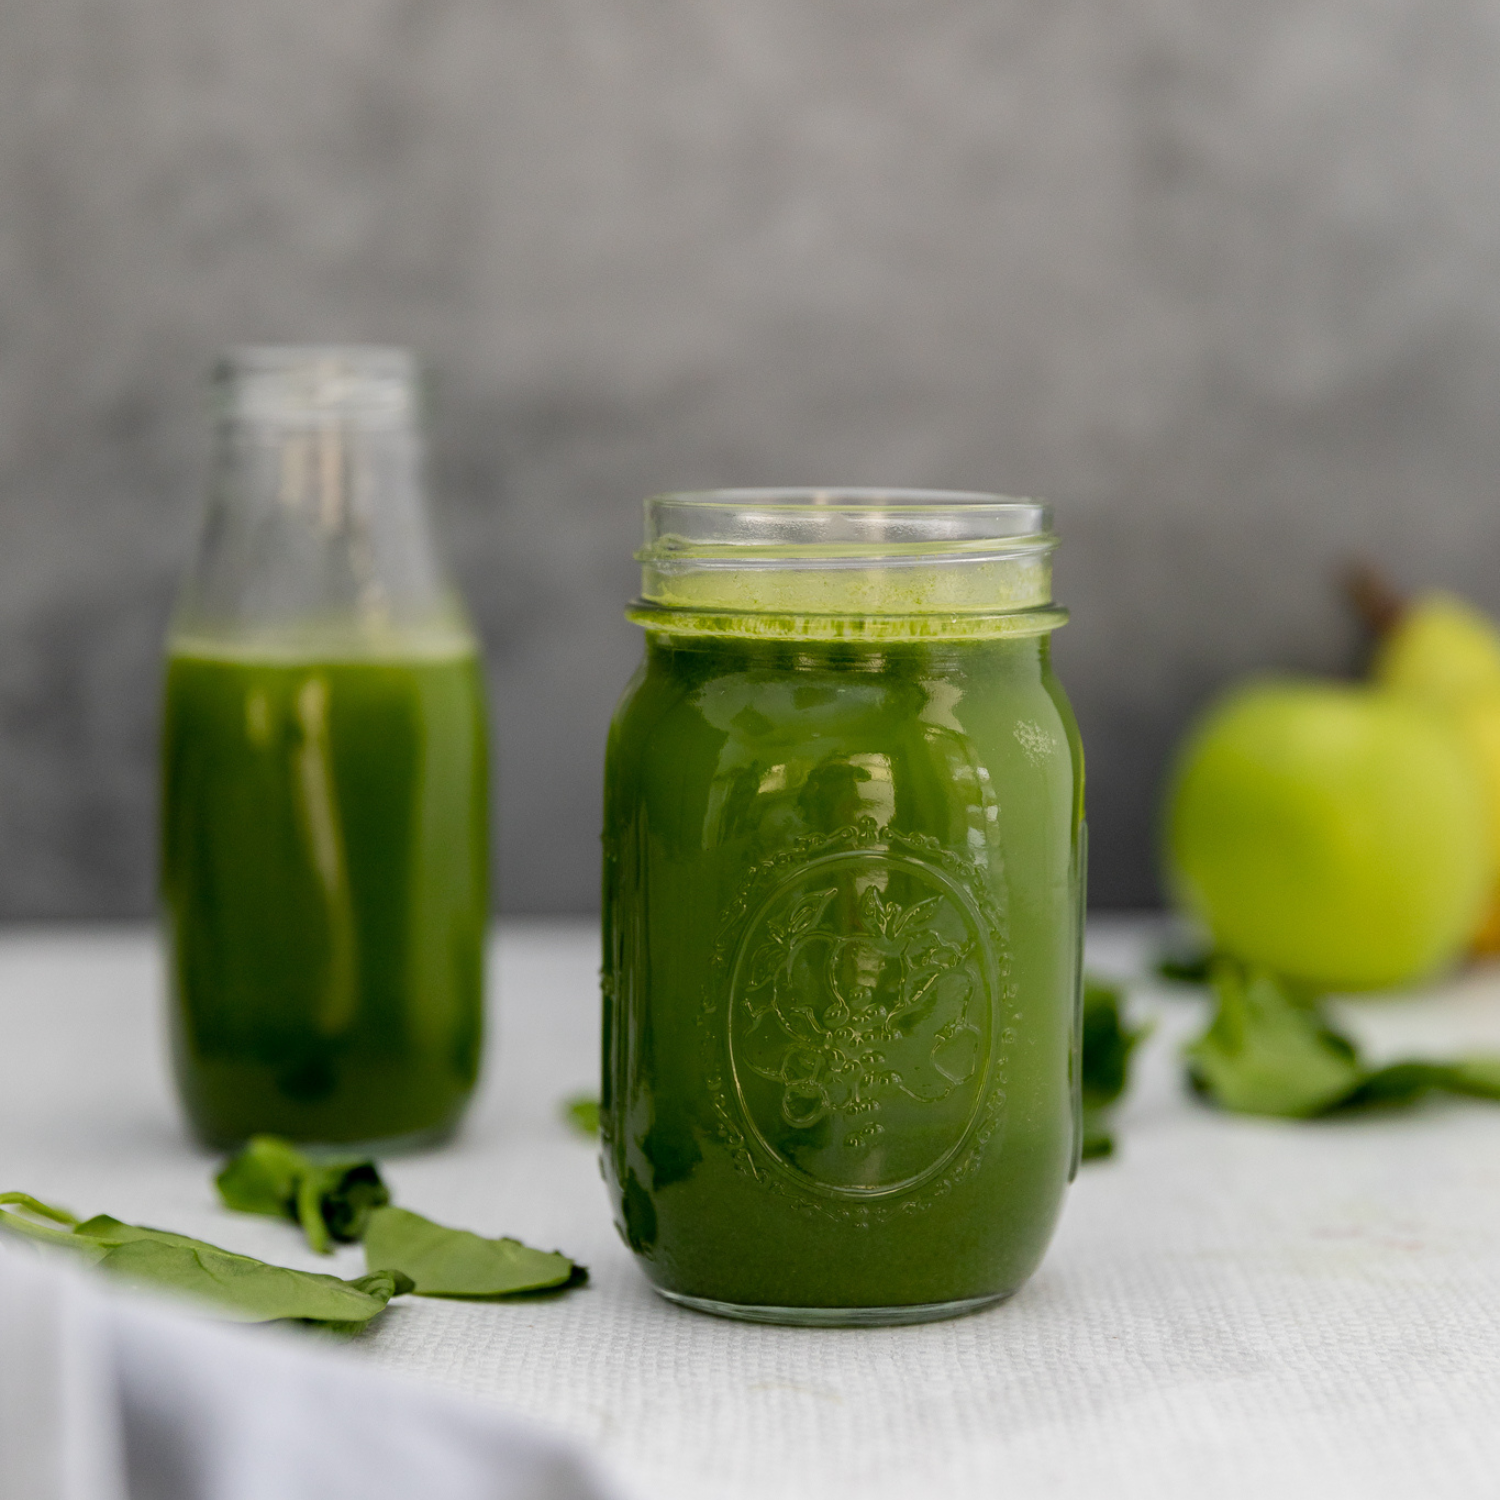 Two glasses of green juice against a gray background.